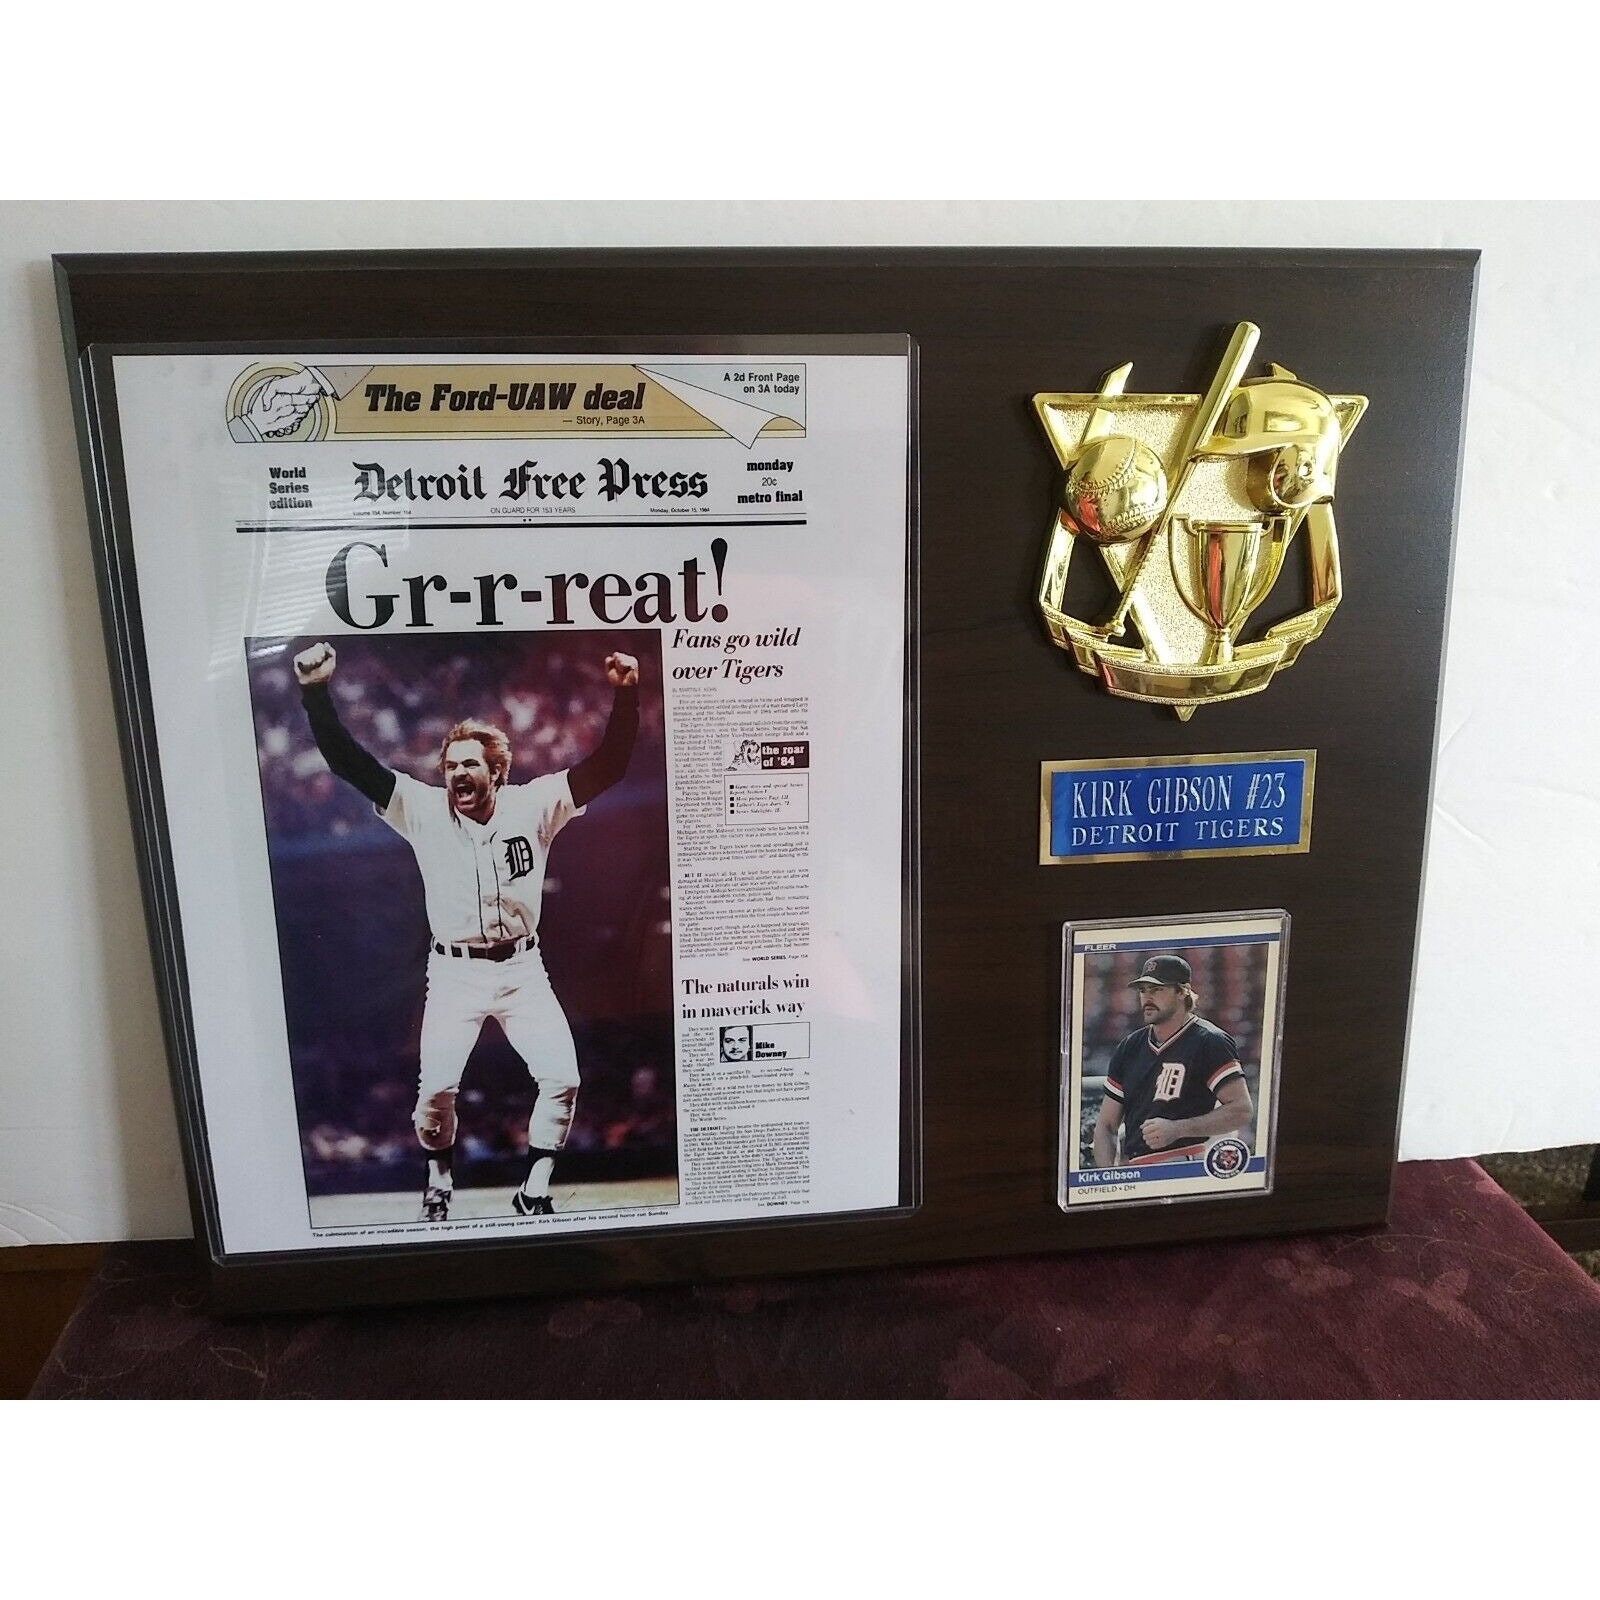 Kirk Gibson Autographed Gr-r-reat! Free Press Poster - Detroit